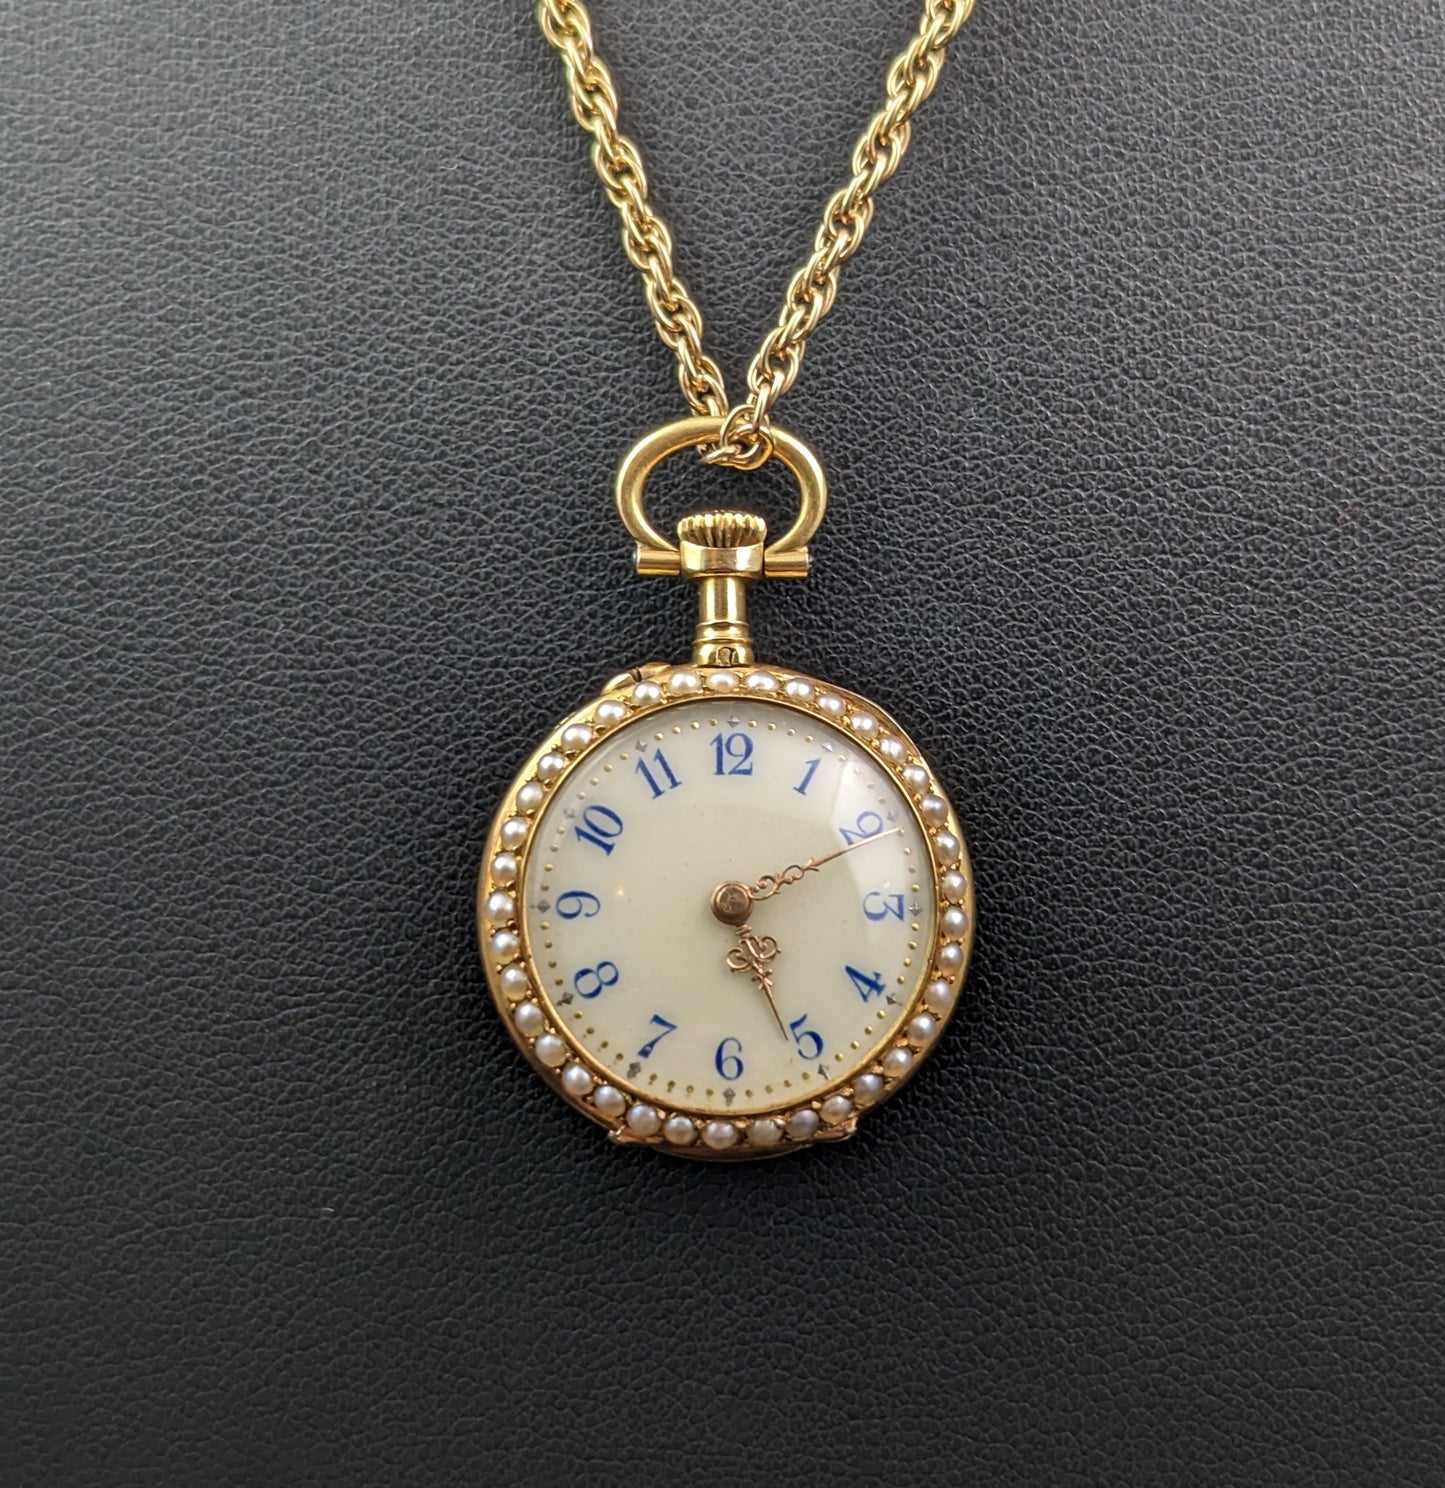 Antique Diamond and Pearl fob watch, 18k gold, Guilloche enamel